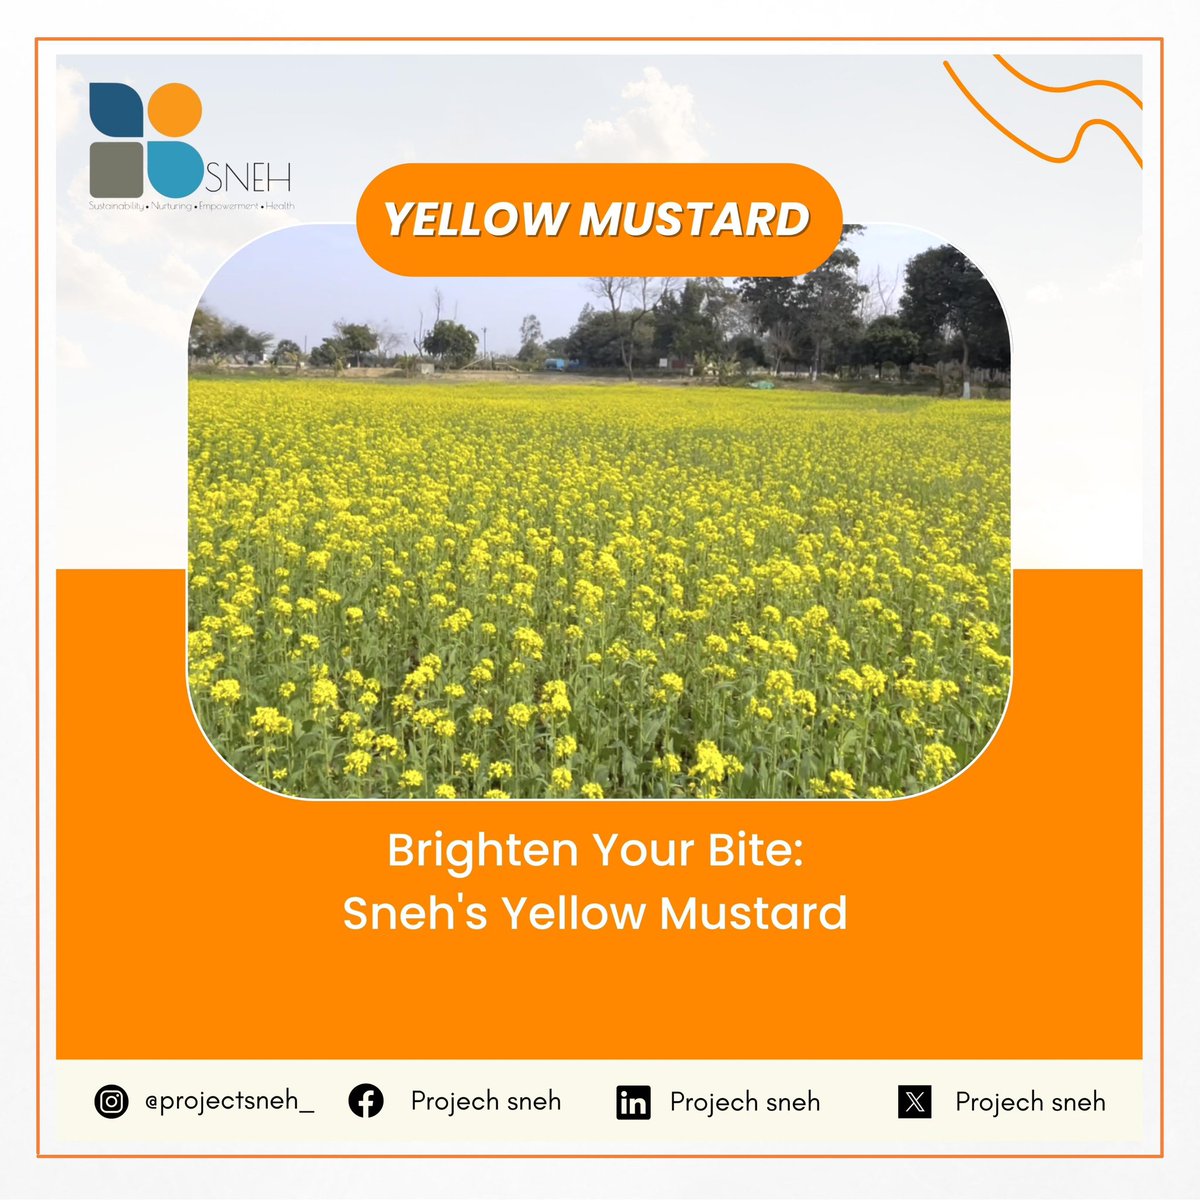 Introducing 'Brighten Your Bite: Sneh's Yellow Mustard' - a project fueled by passion and a zest for flavor.
#BrightenYourBite #SnehsYellowMustard #FlavorfulJourney #MustardMagic #CulinaryInnovation #TangyDelight #FoodieFinds #GourmetExperience